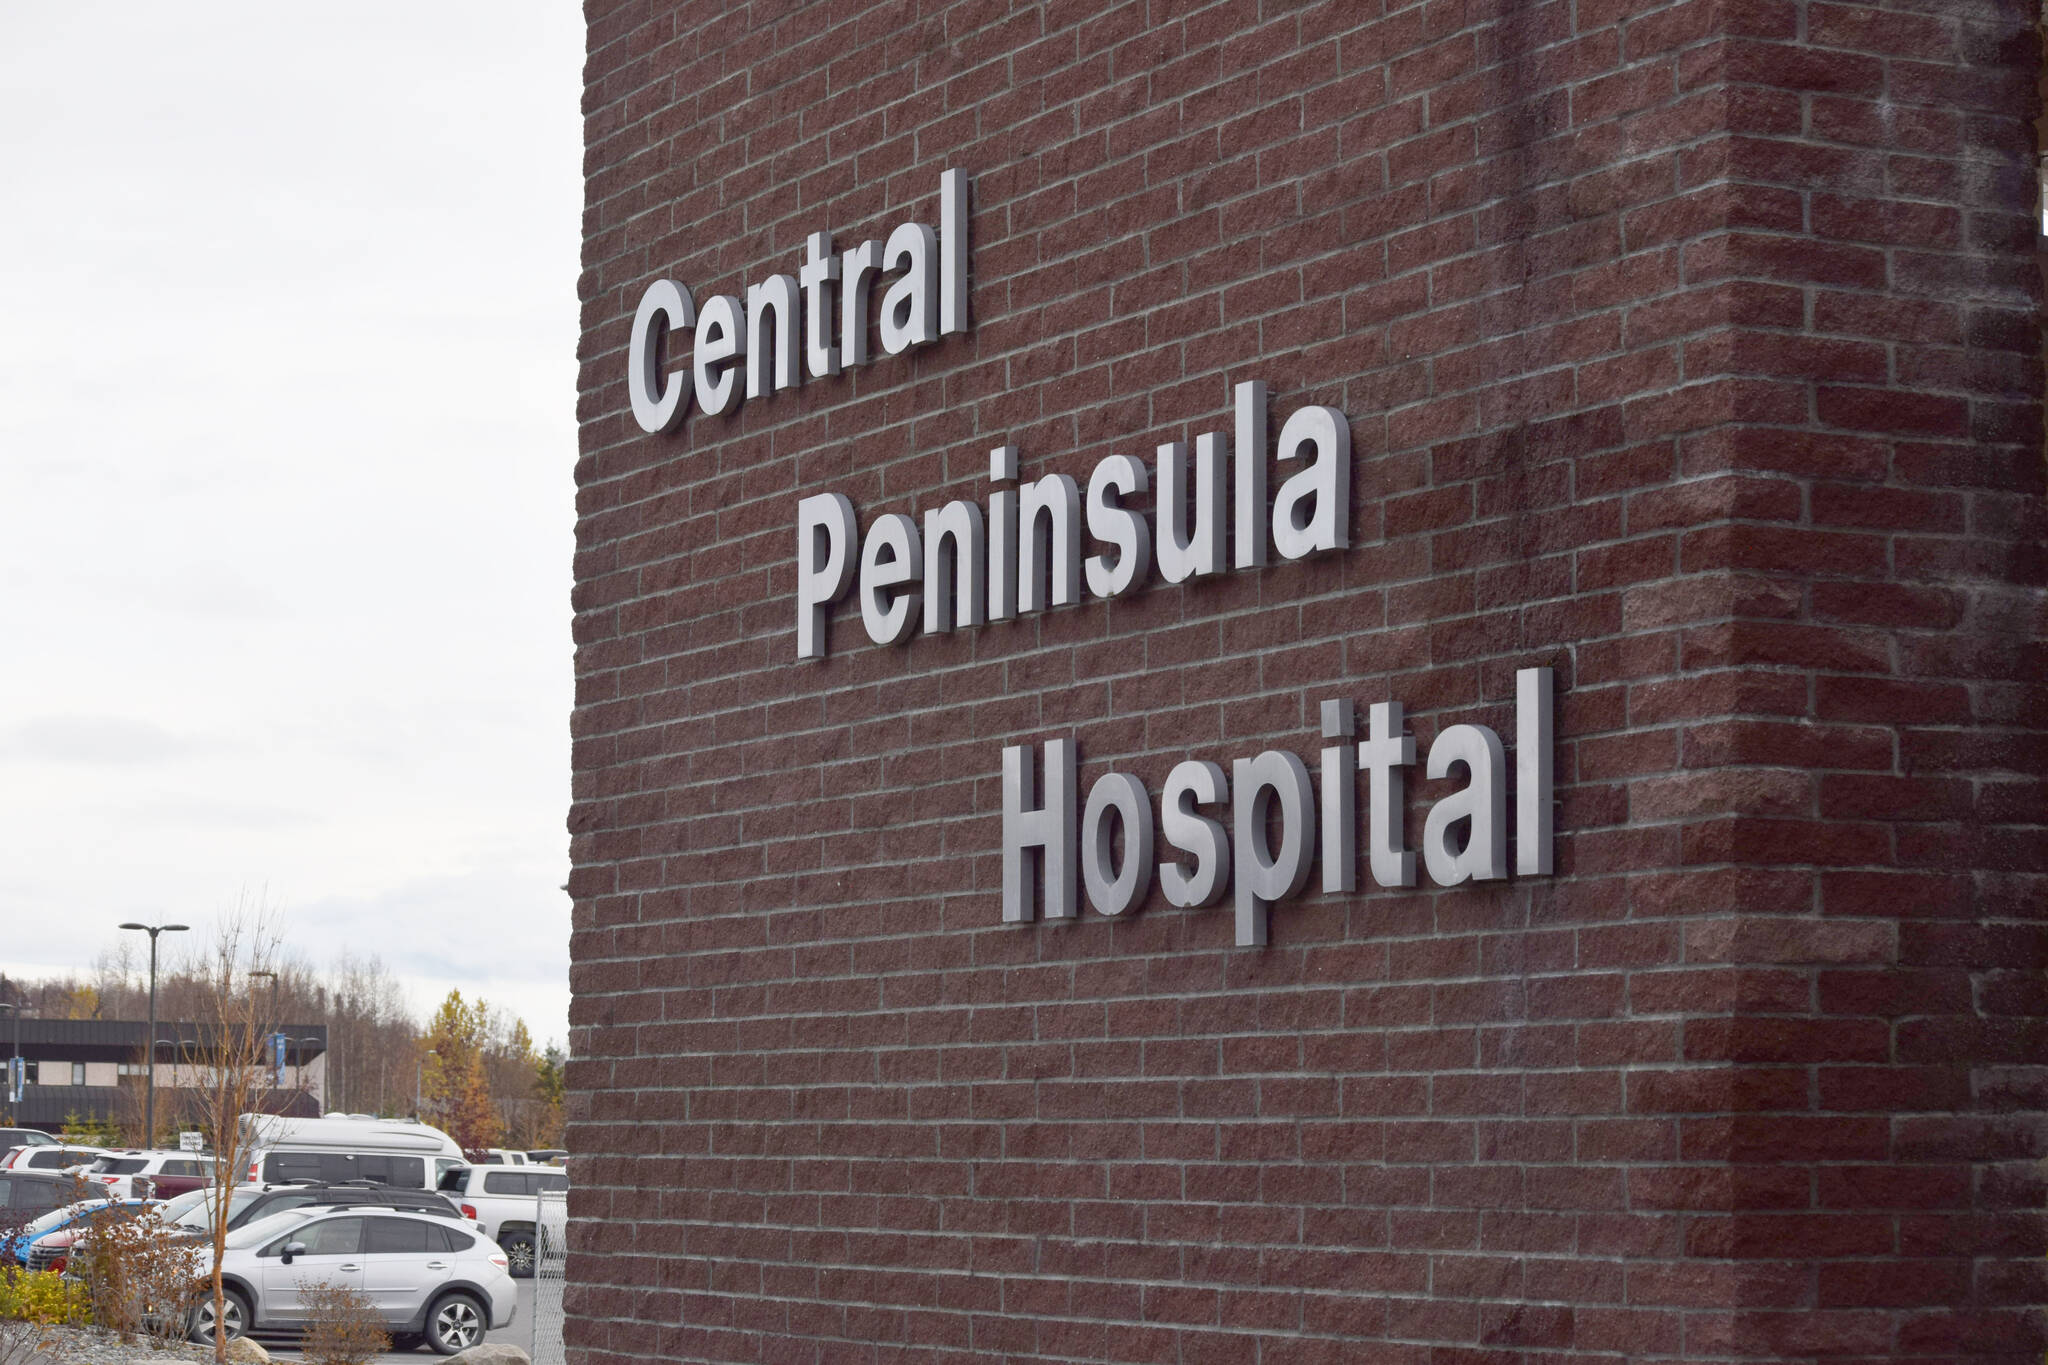 Central Peninsula Hospital is seen in Soldotna, Alaska, on Wednesday, Oct. 13, 2021. (Camille Botello/Peninsula Clarion)